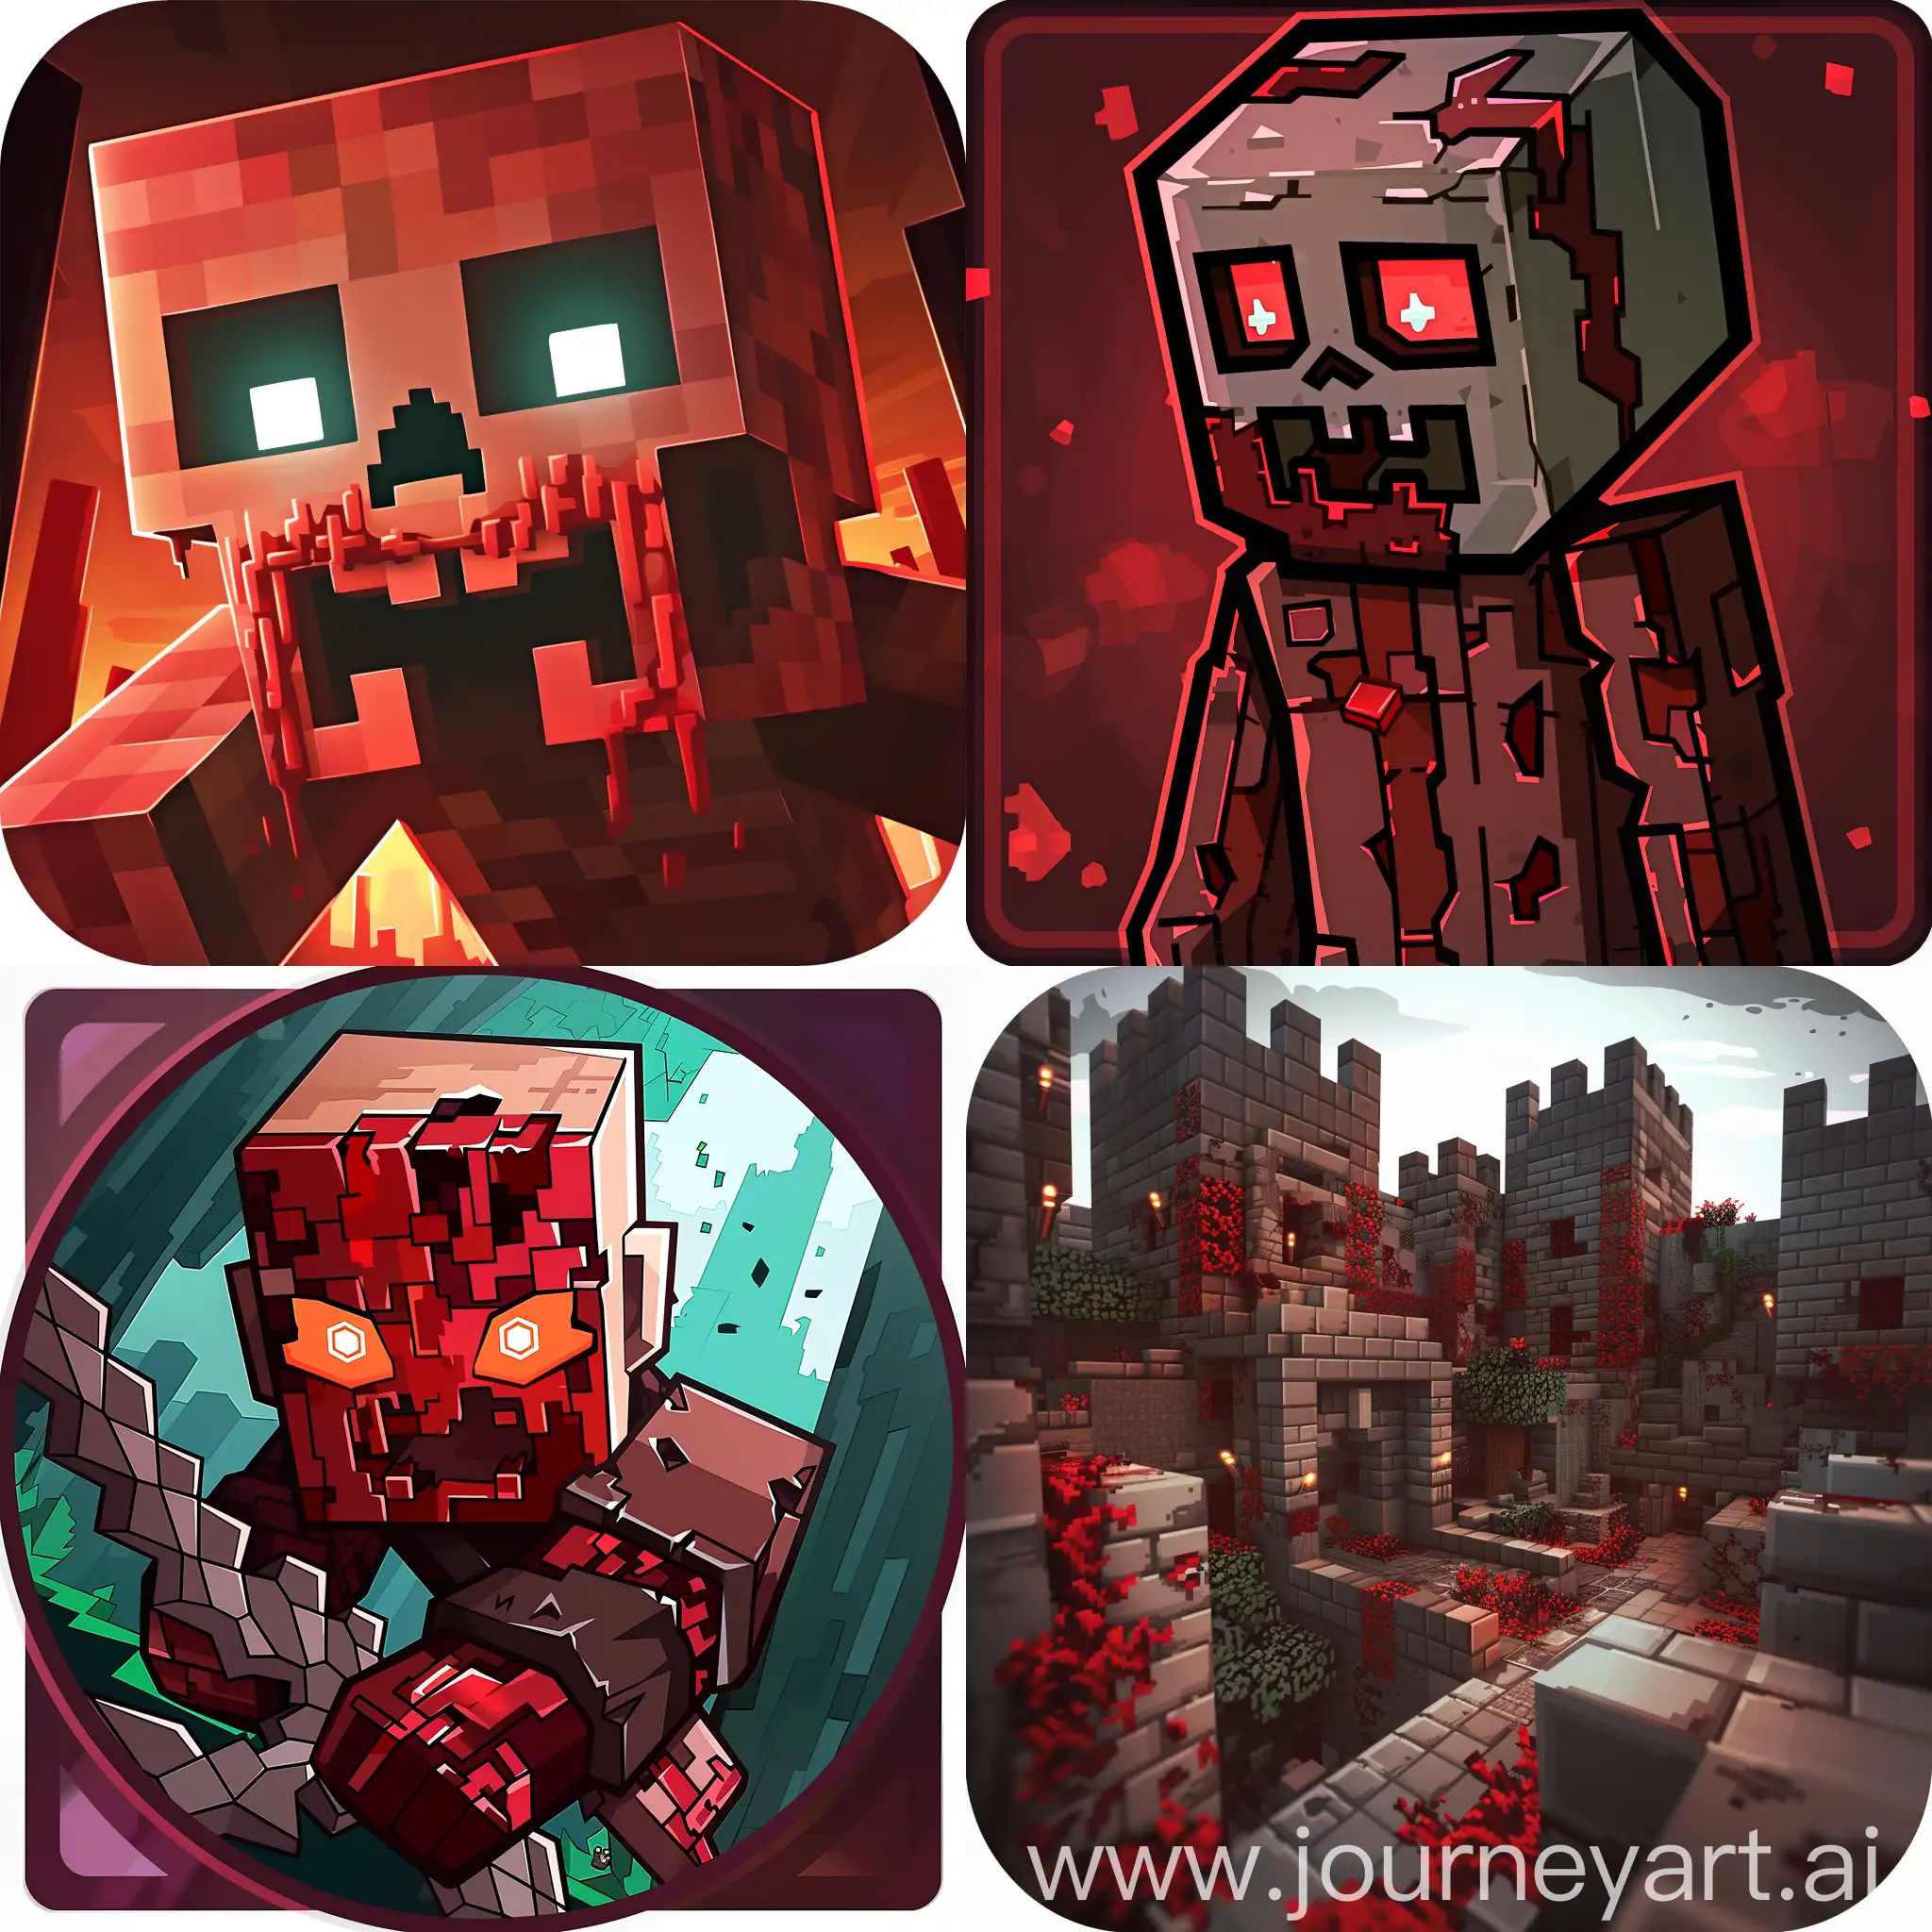 An icon for the discord server for role-playing games in the mine. It's season 2 now and there will be an infection of living red flesh from the minecraft mod The Flesh That HAn icon for the discord server for role-playing games in the mine. It's season 2 now and there will be an infection of living red flesh from the minecraft mod The Flesh That Hatesates